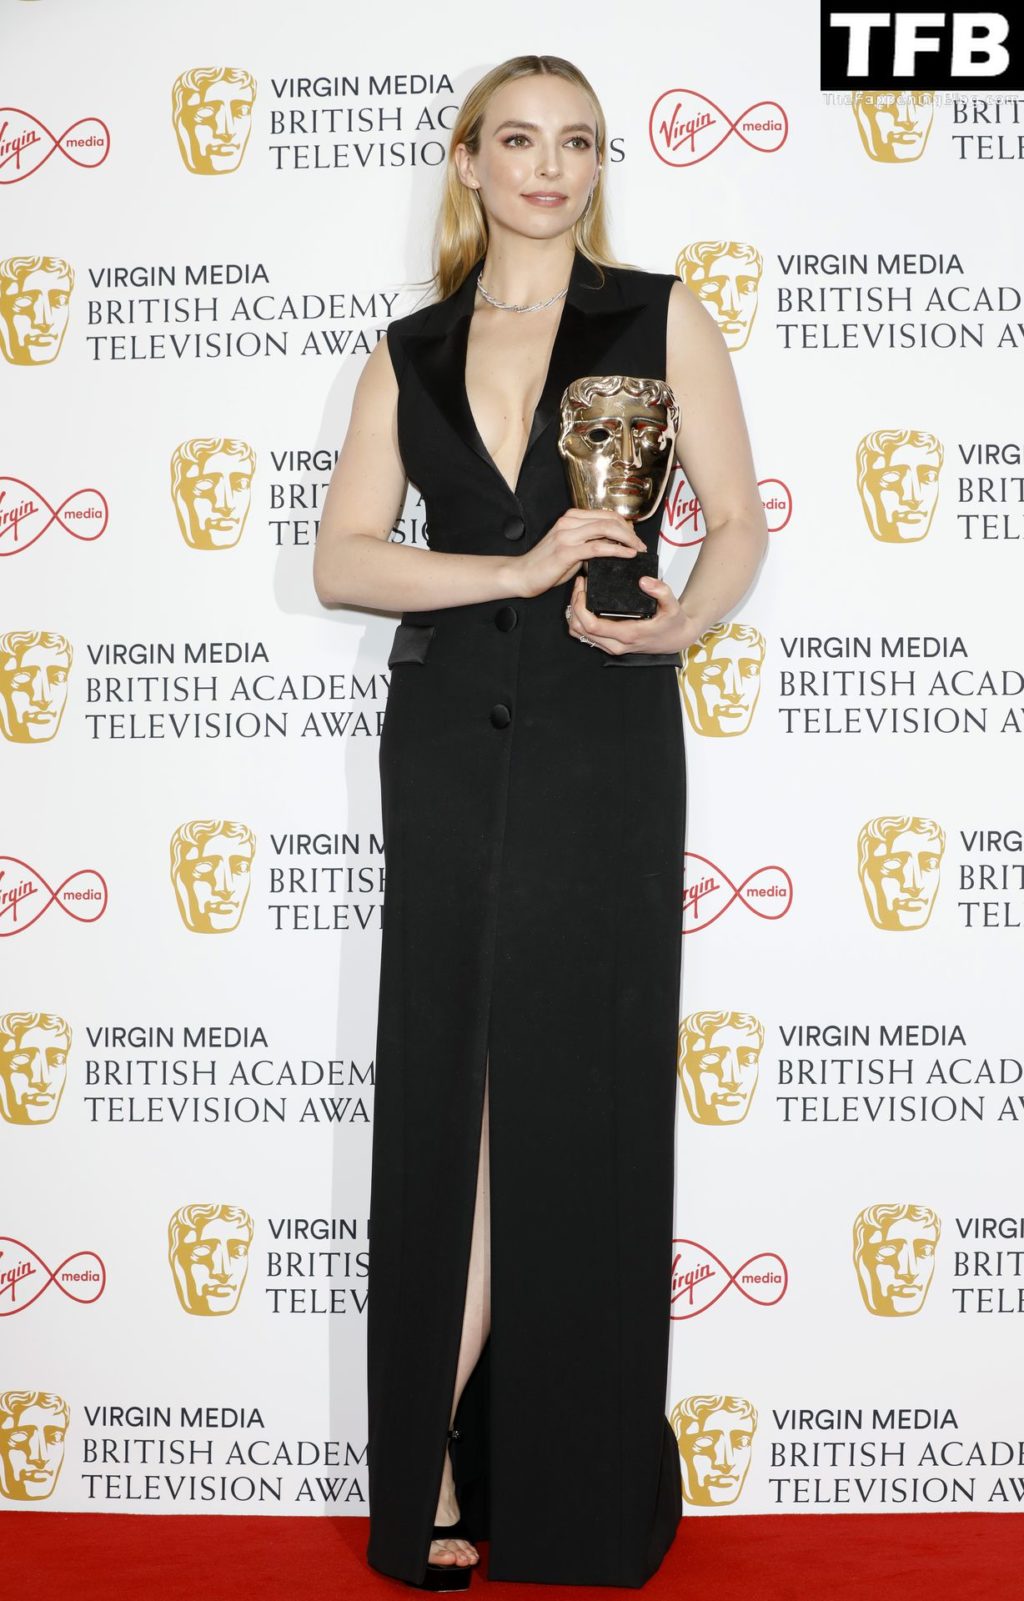 Jodie Comer Displays Her Cleavage at the Virgin Media British Academy Television Awards (93 Photos)